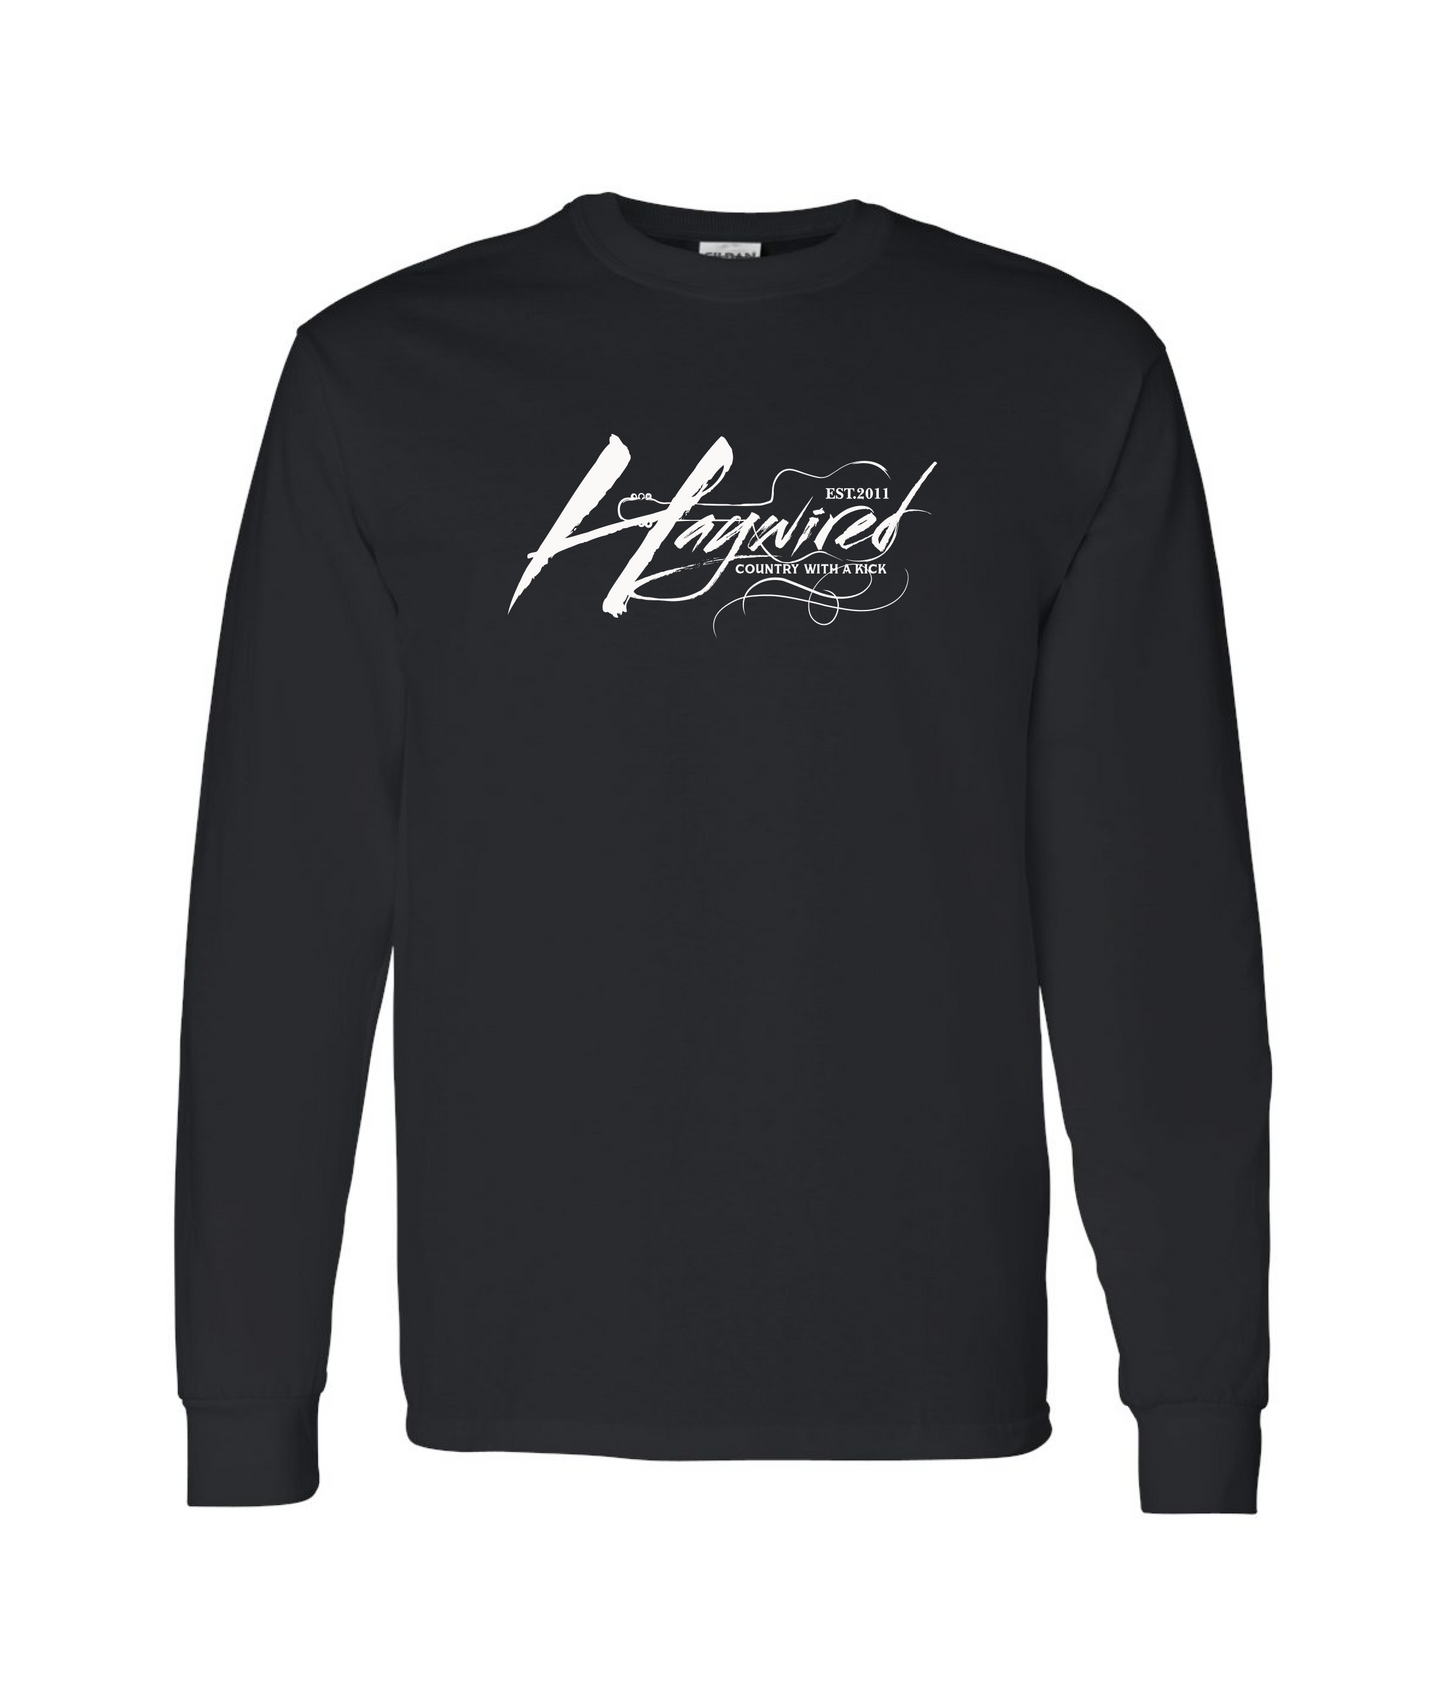 Haywired - Country With a Kick Logo - Black Long Sleeve T